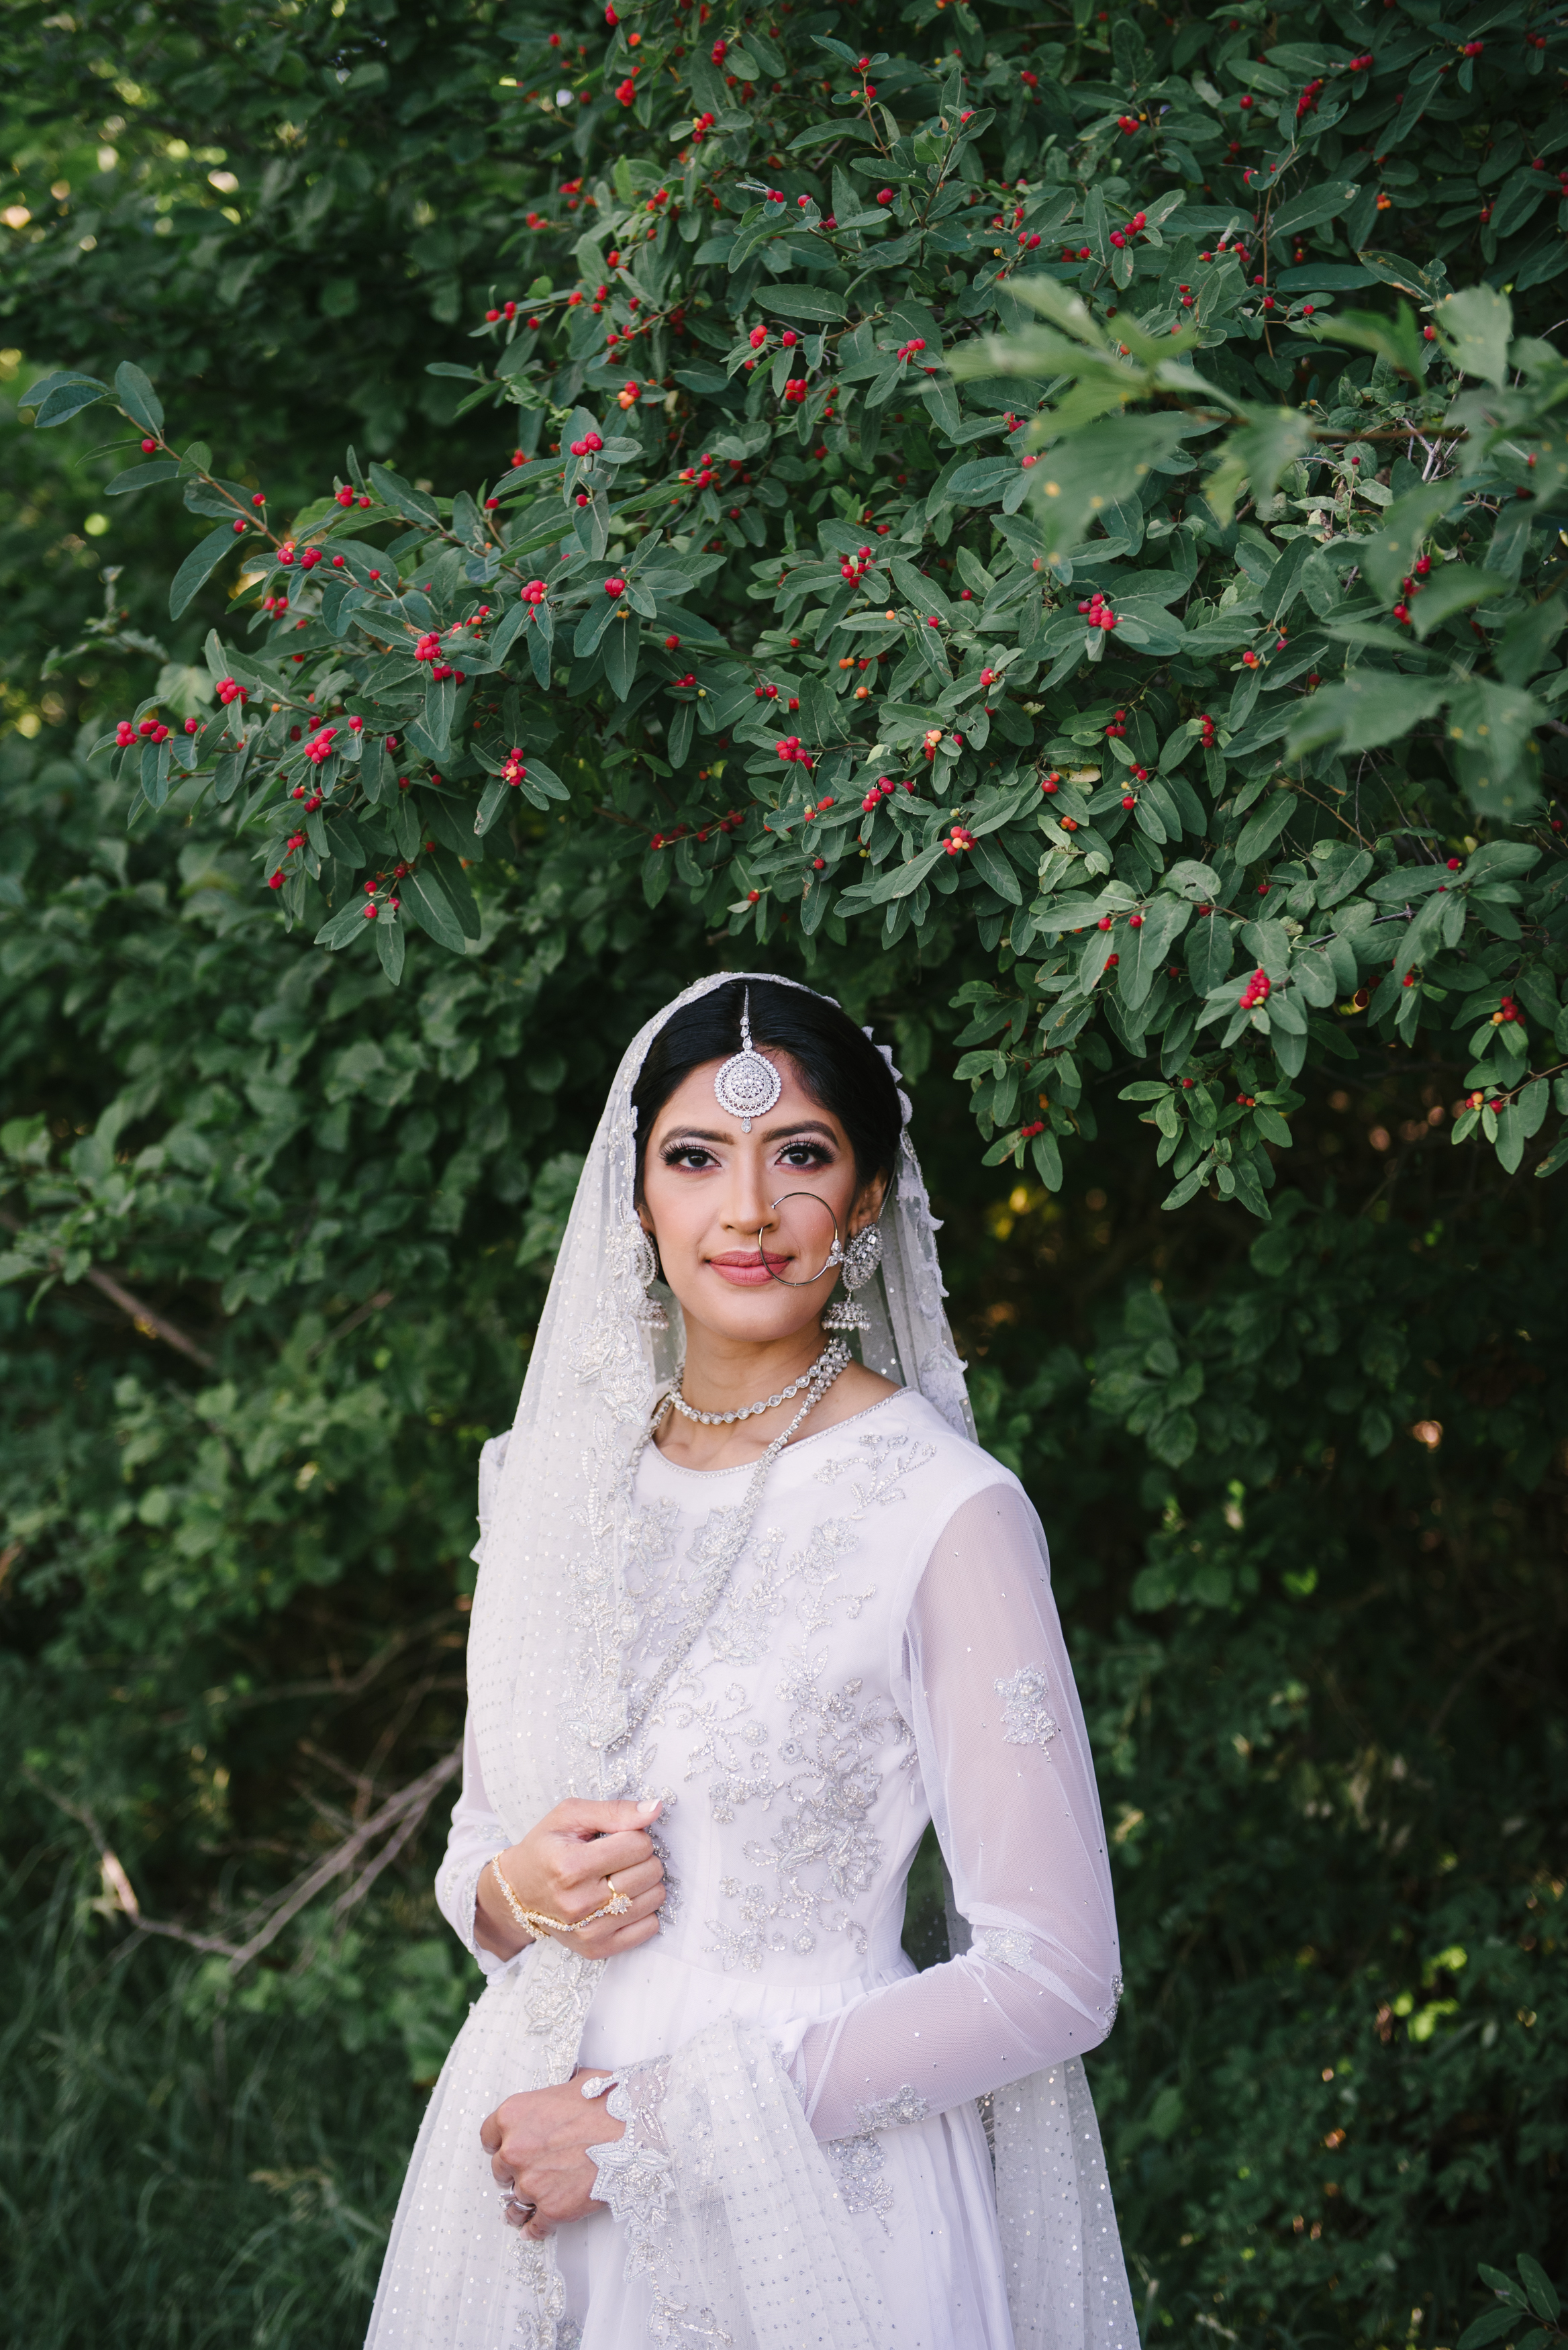 Weddings Archives - Strokes Photography Blog